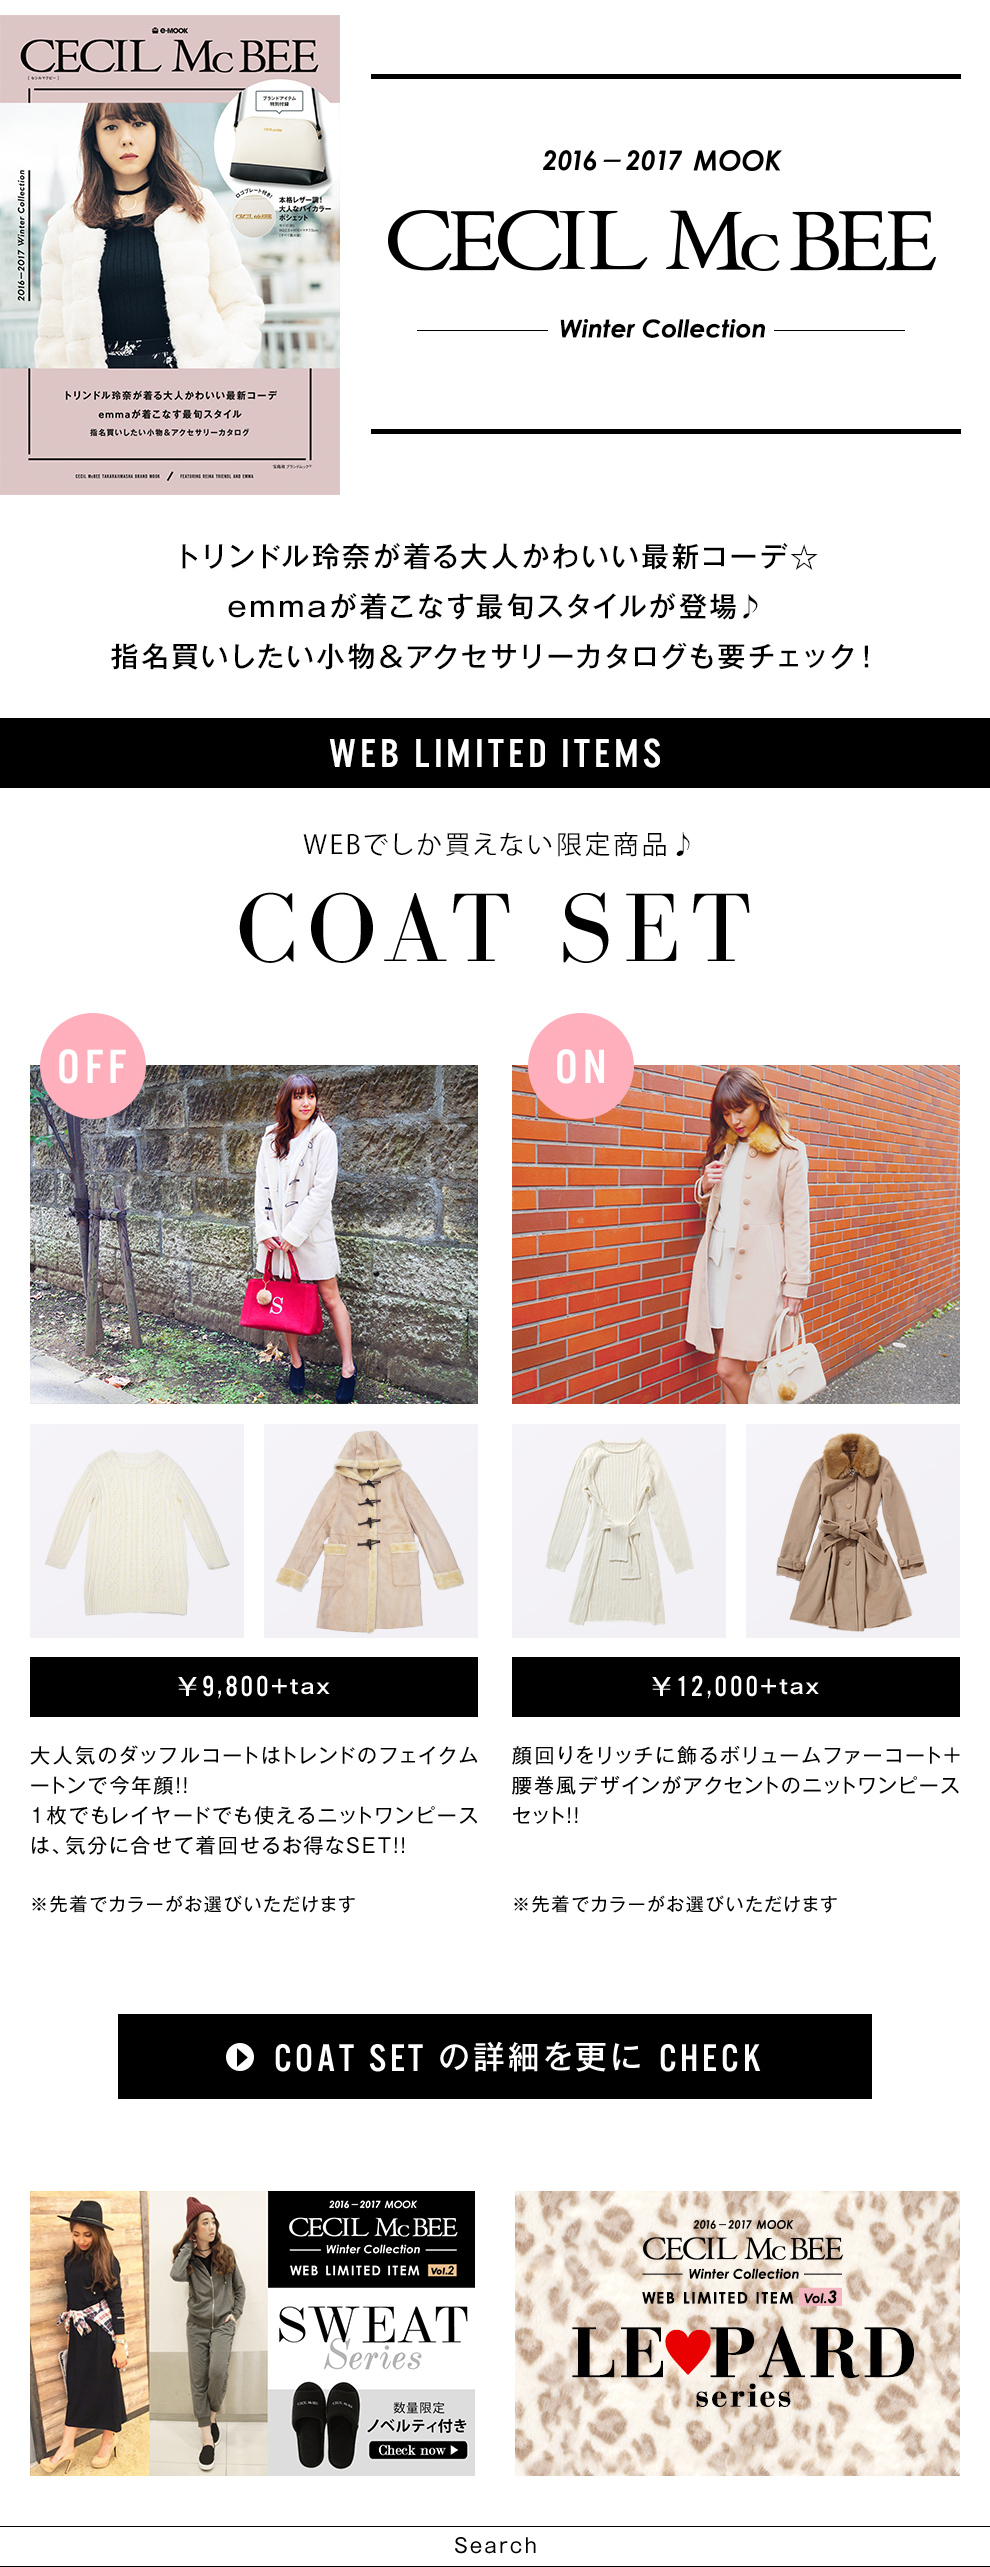 2016-2017 MOOK CECIL McBEE Winter Collection